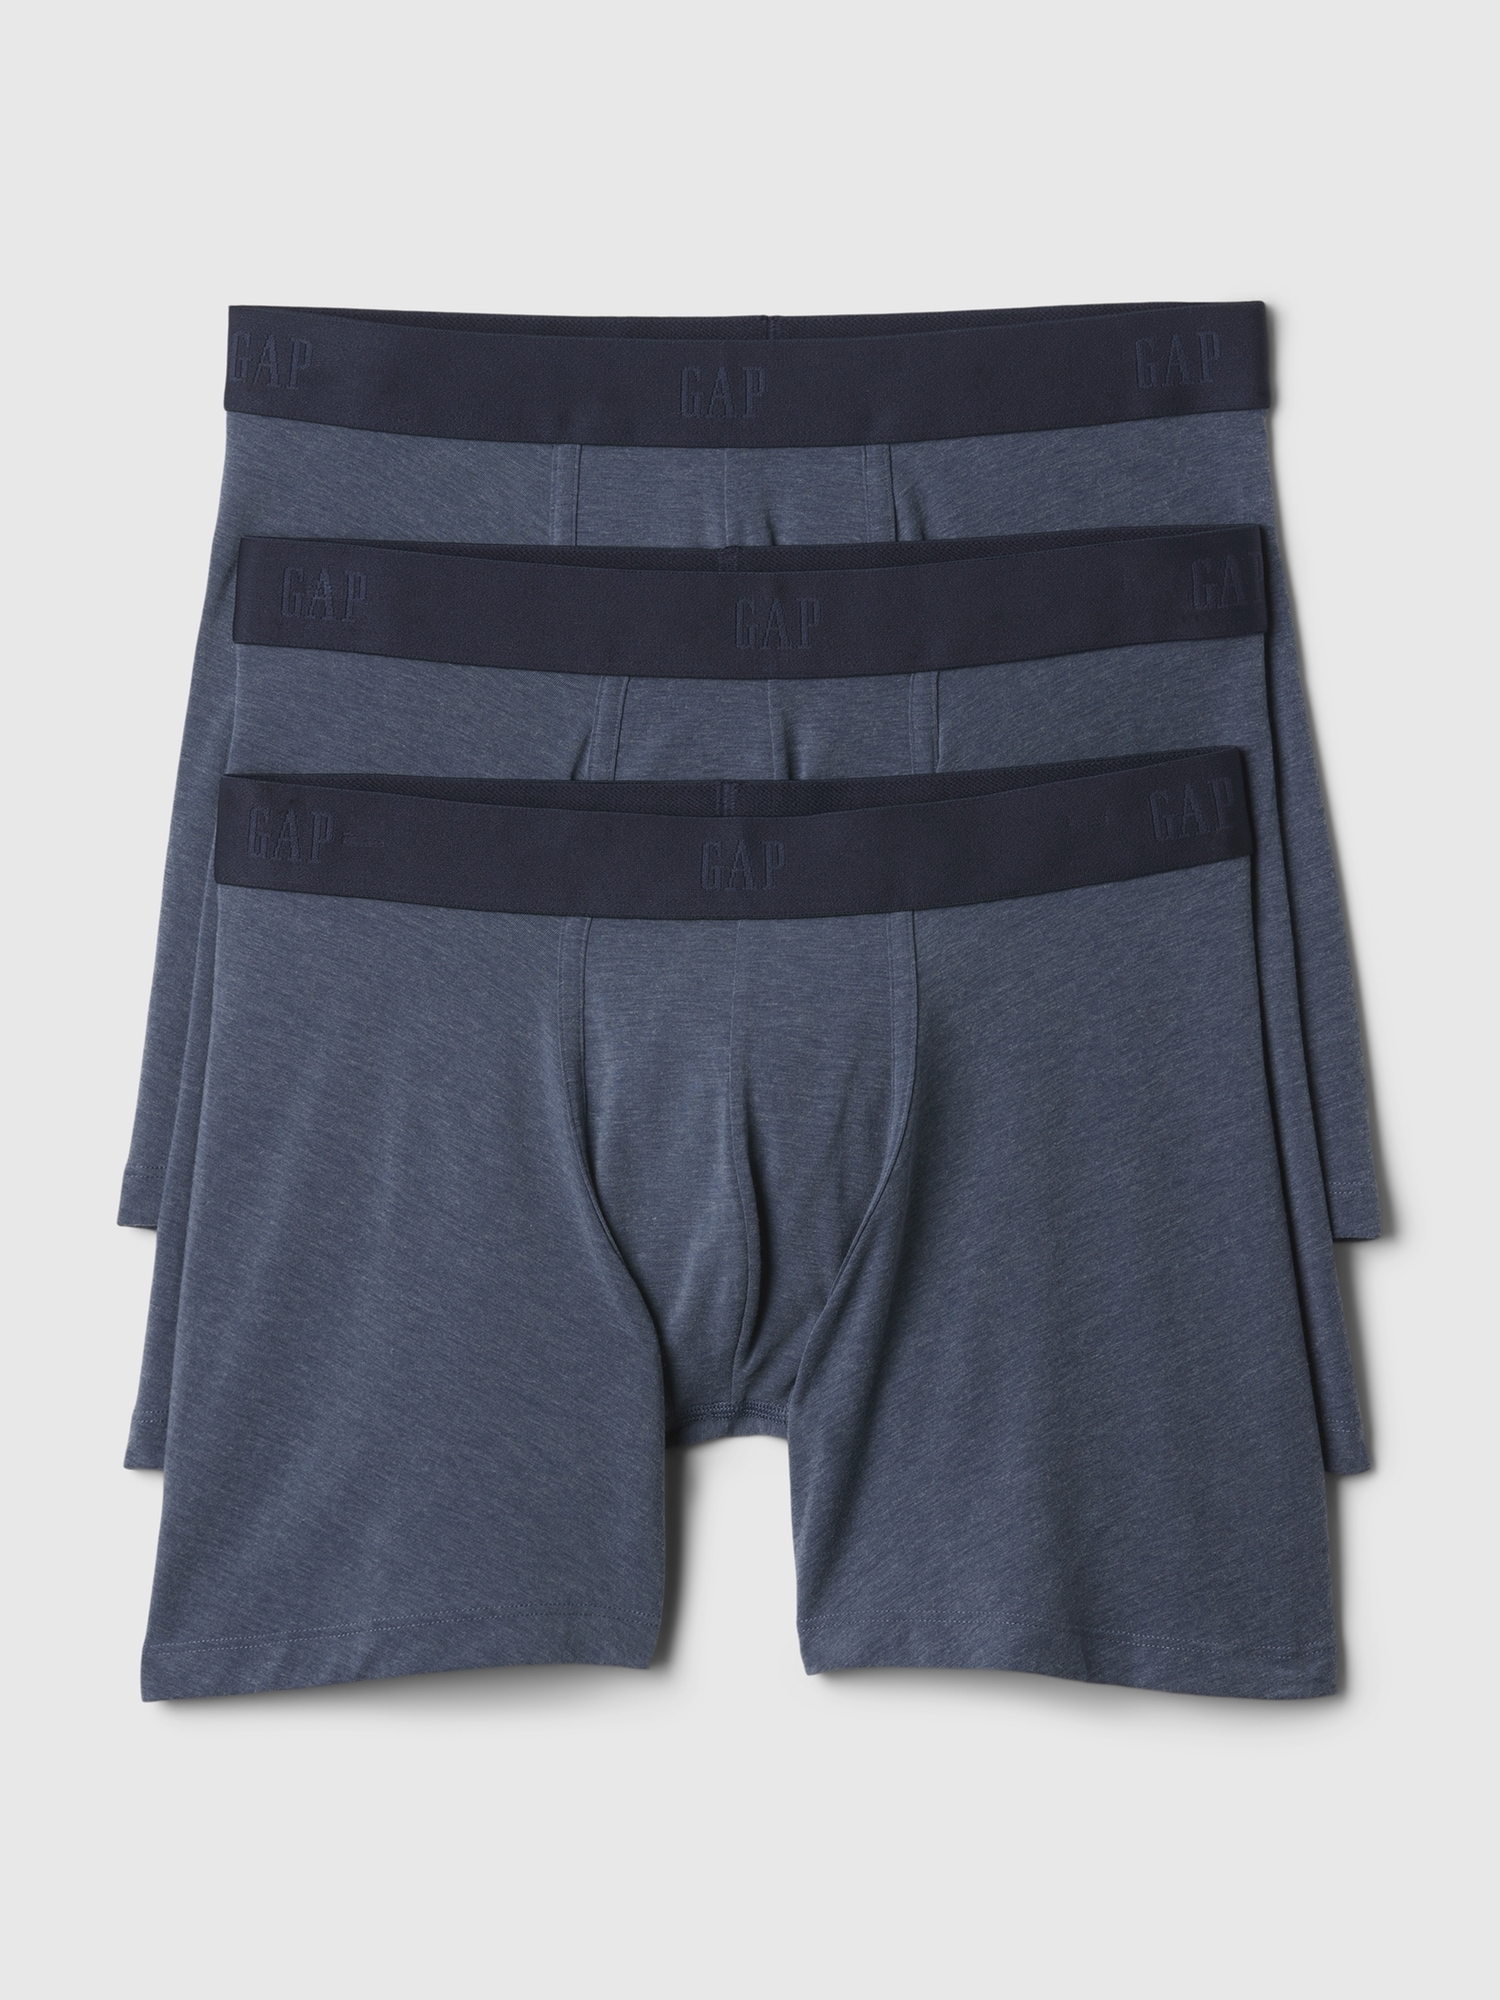 GAP Printed Men Boxer - Buy GAP Printed Men Boxer Online at Best Prices in  India